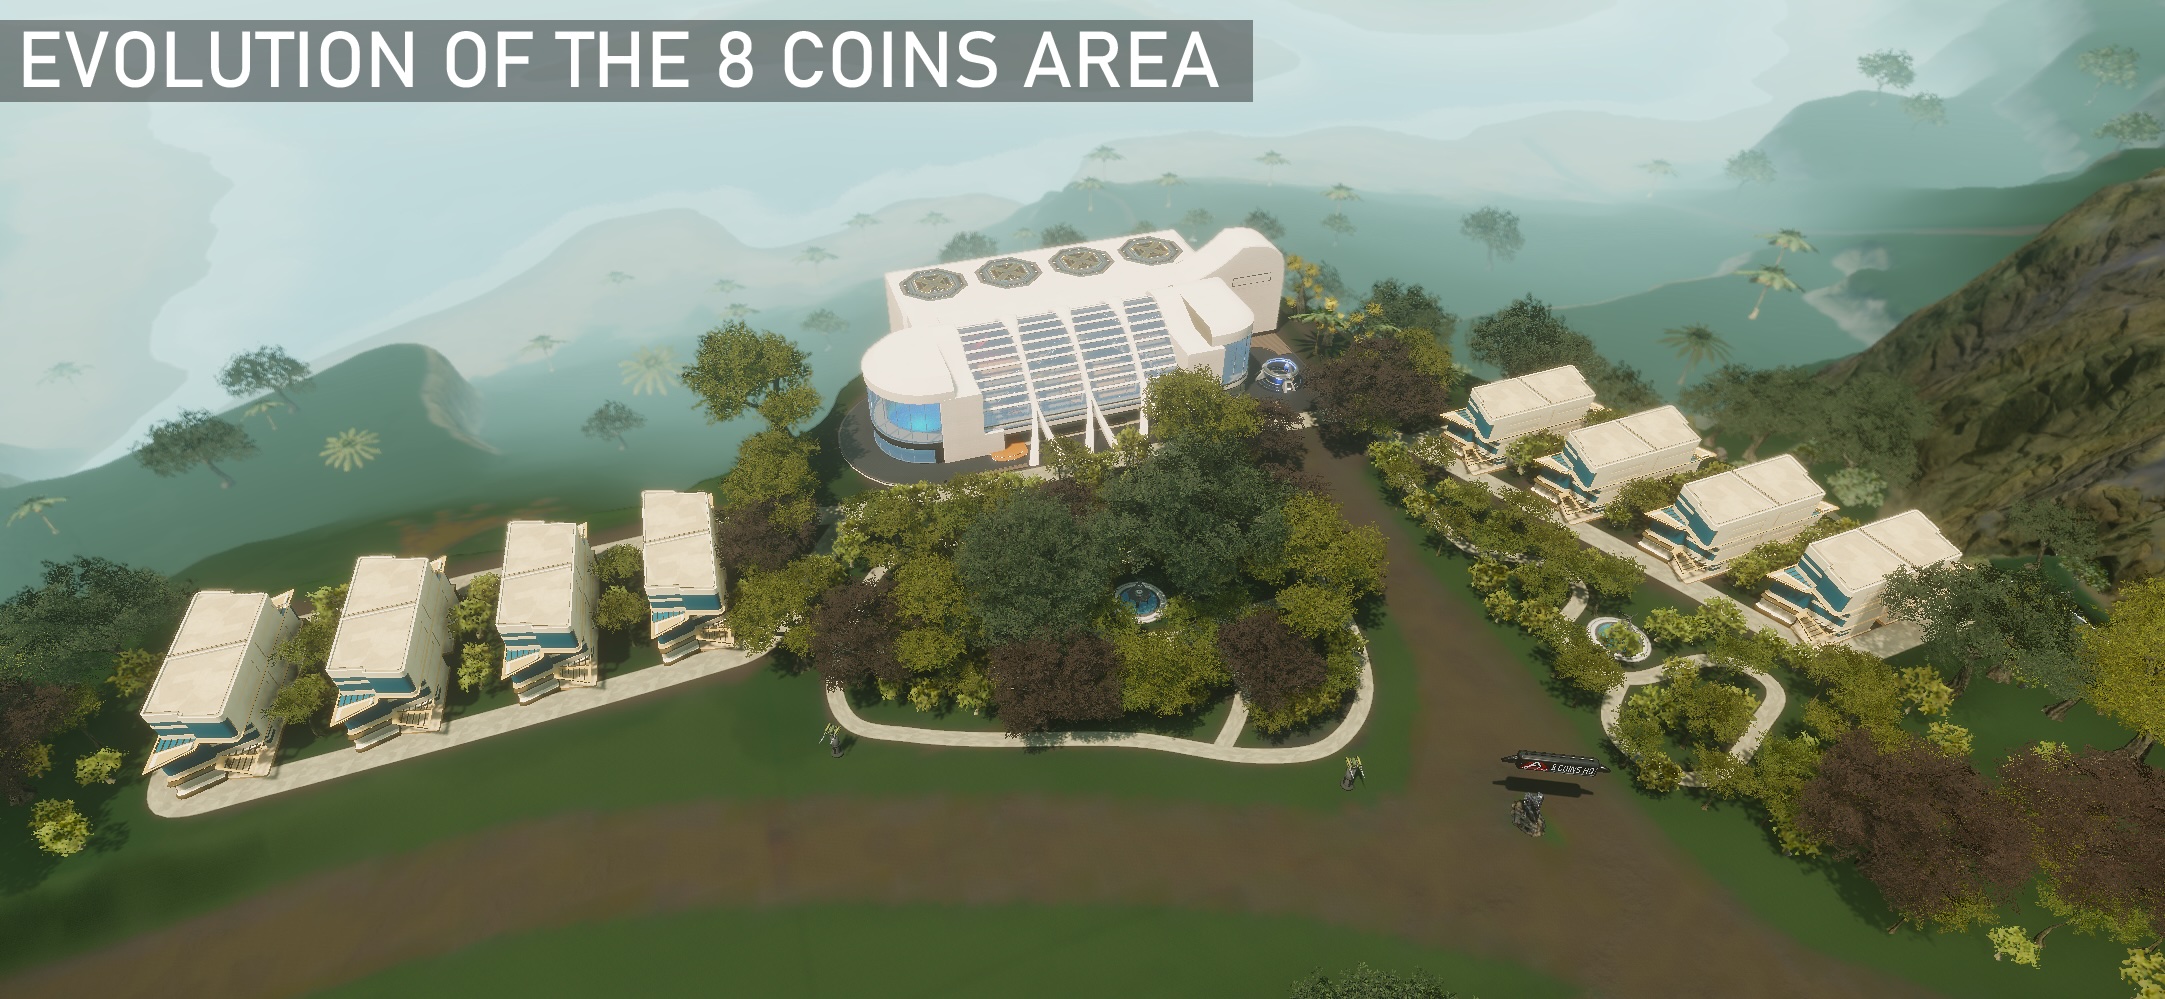 Evolution of the 8 Coins Area_forum.jpg